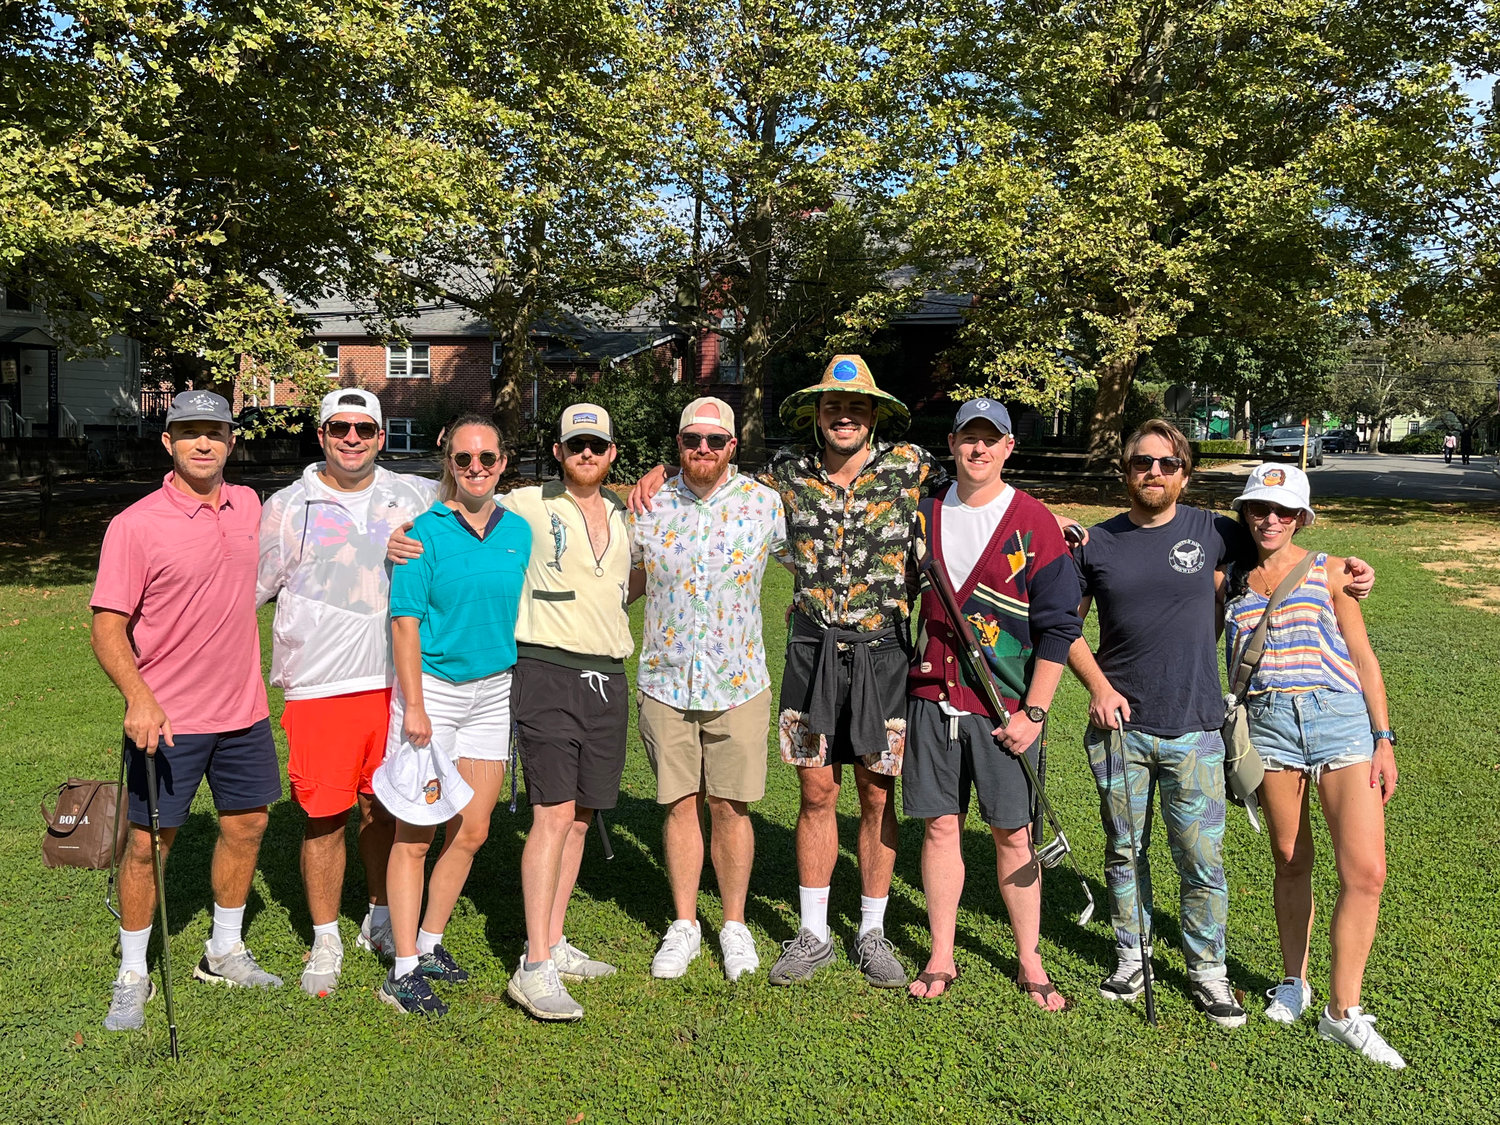 Michael Lennon, fourth from right, and his friends took to the course to play some golf and keep up the event he started some 14 years ago.